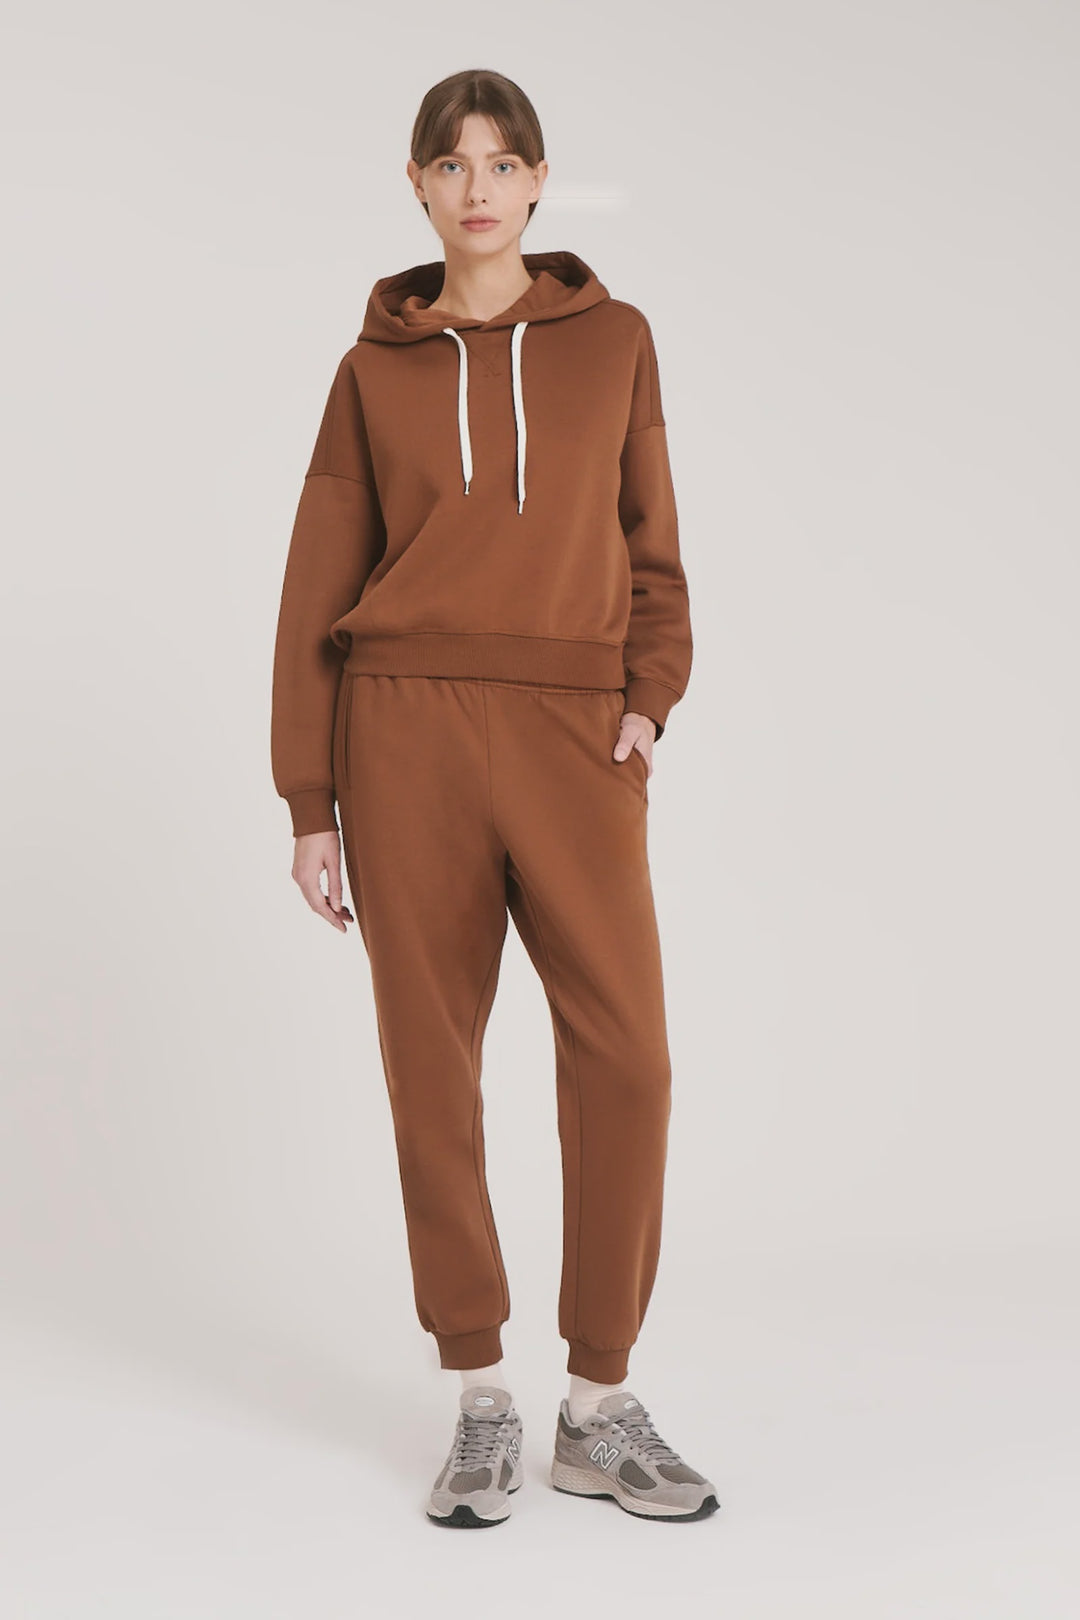 Nude Lucy Carter Classic Trackpant - Toffee